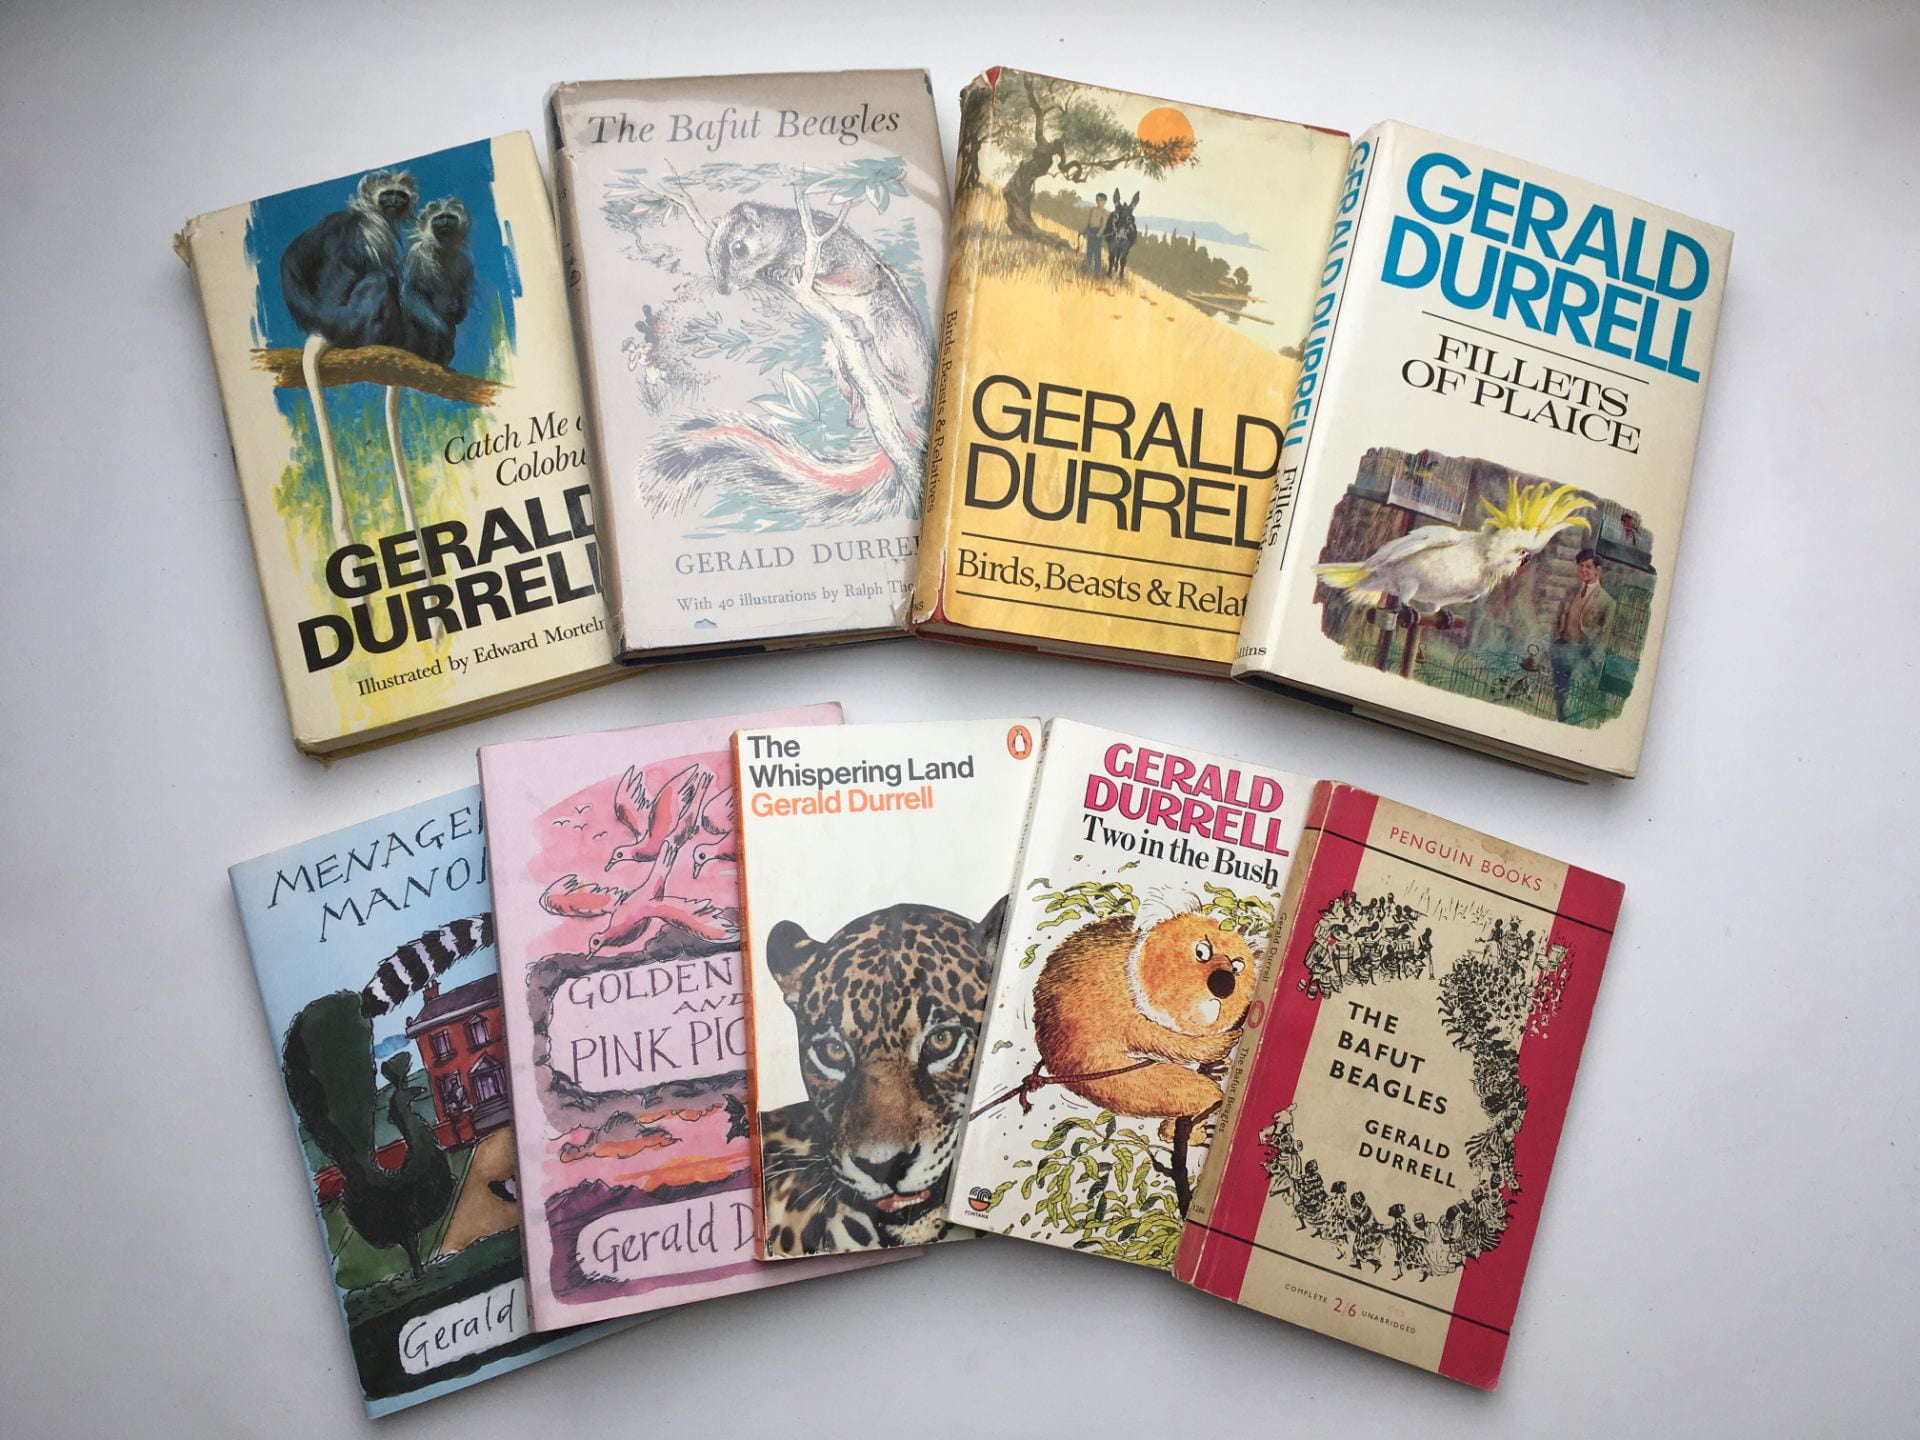 Image of books from the collection 'books that built a zoo'